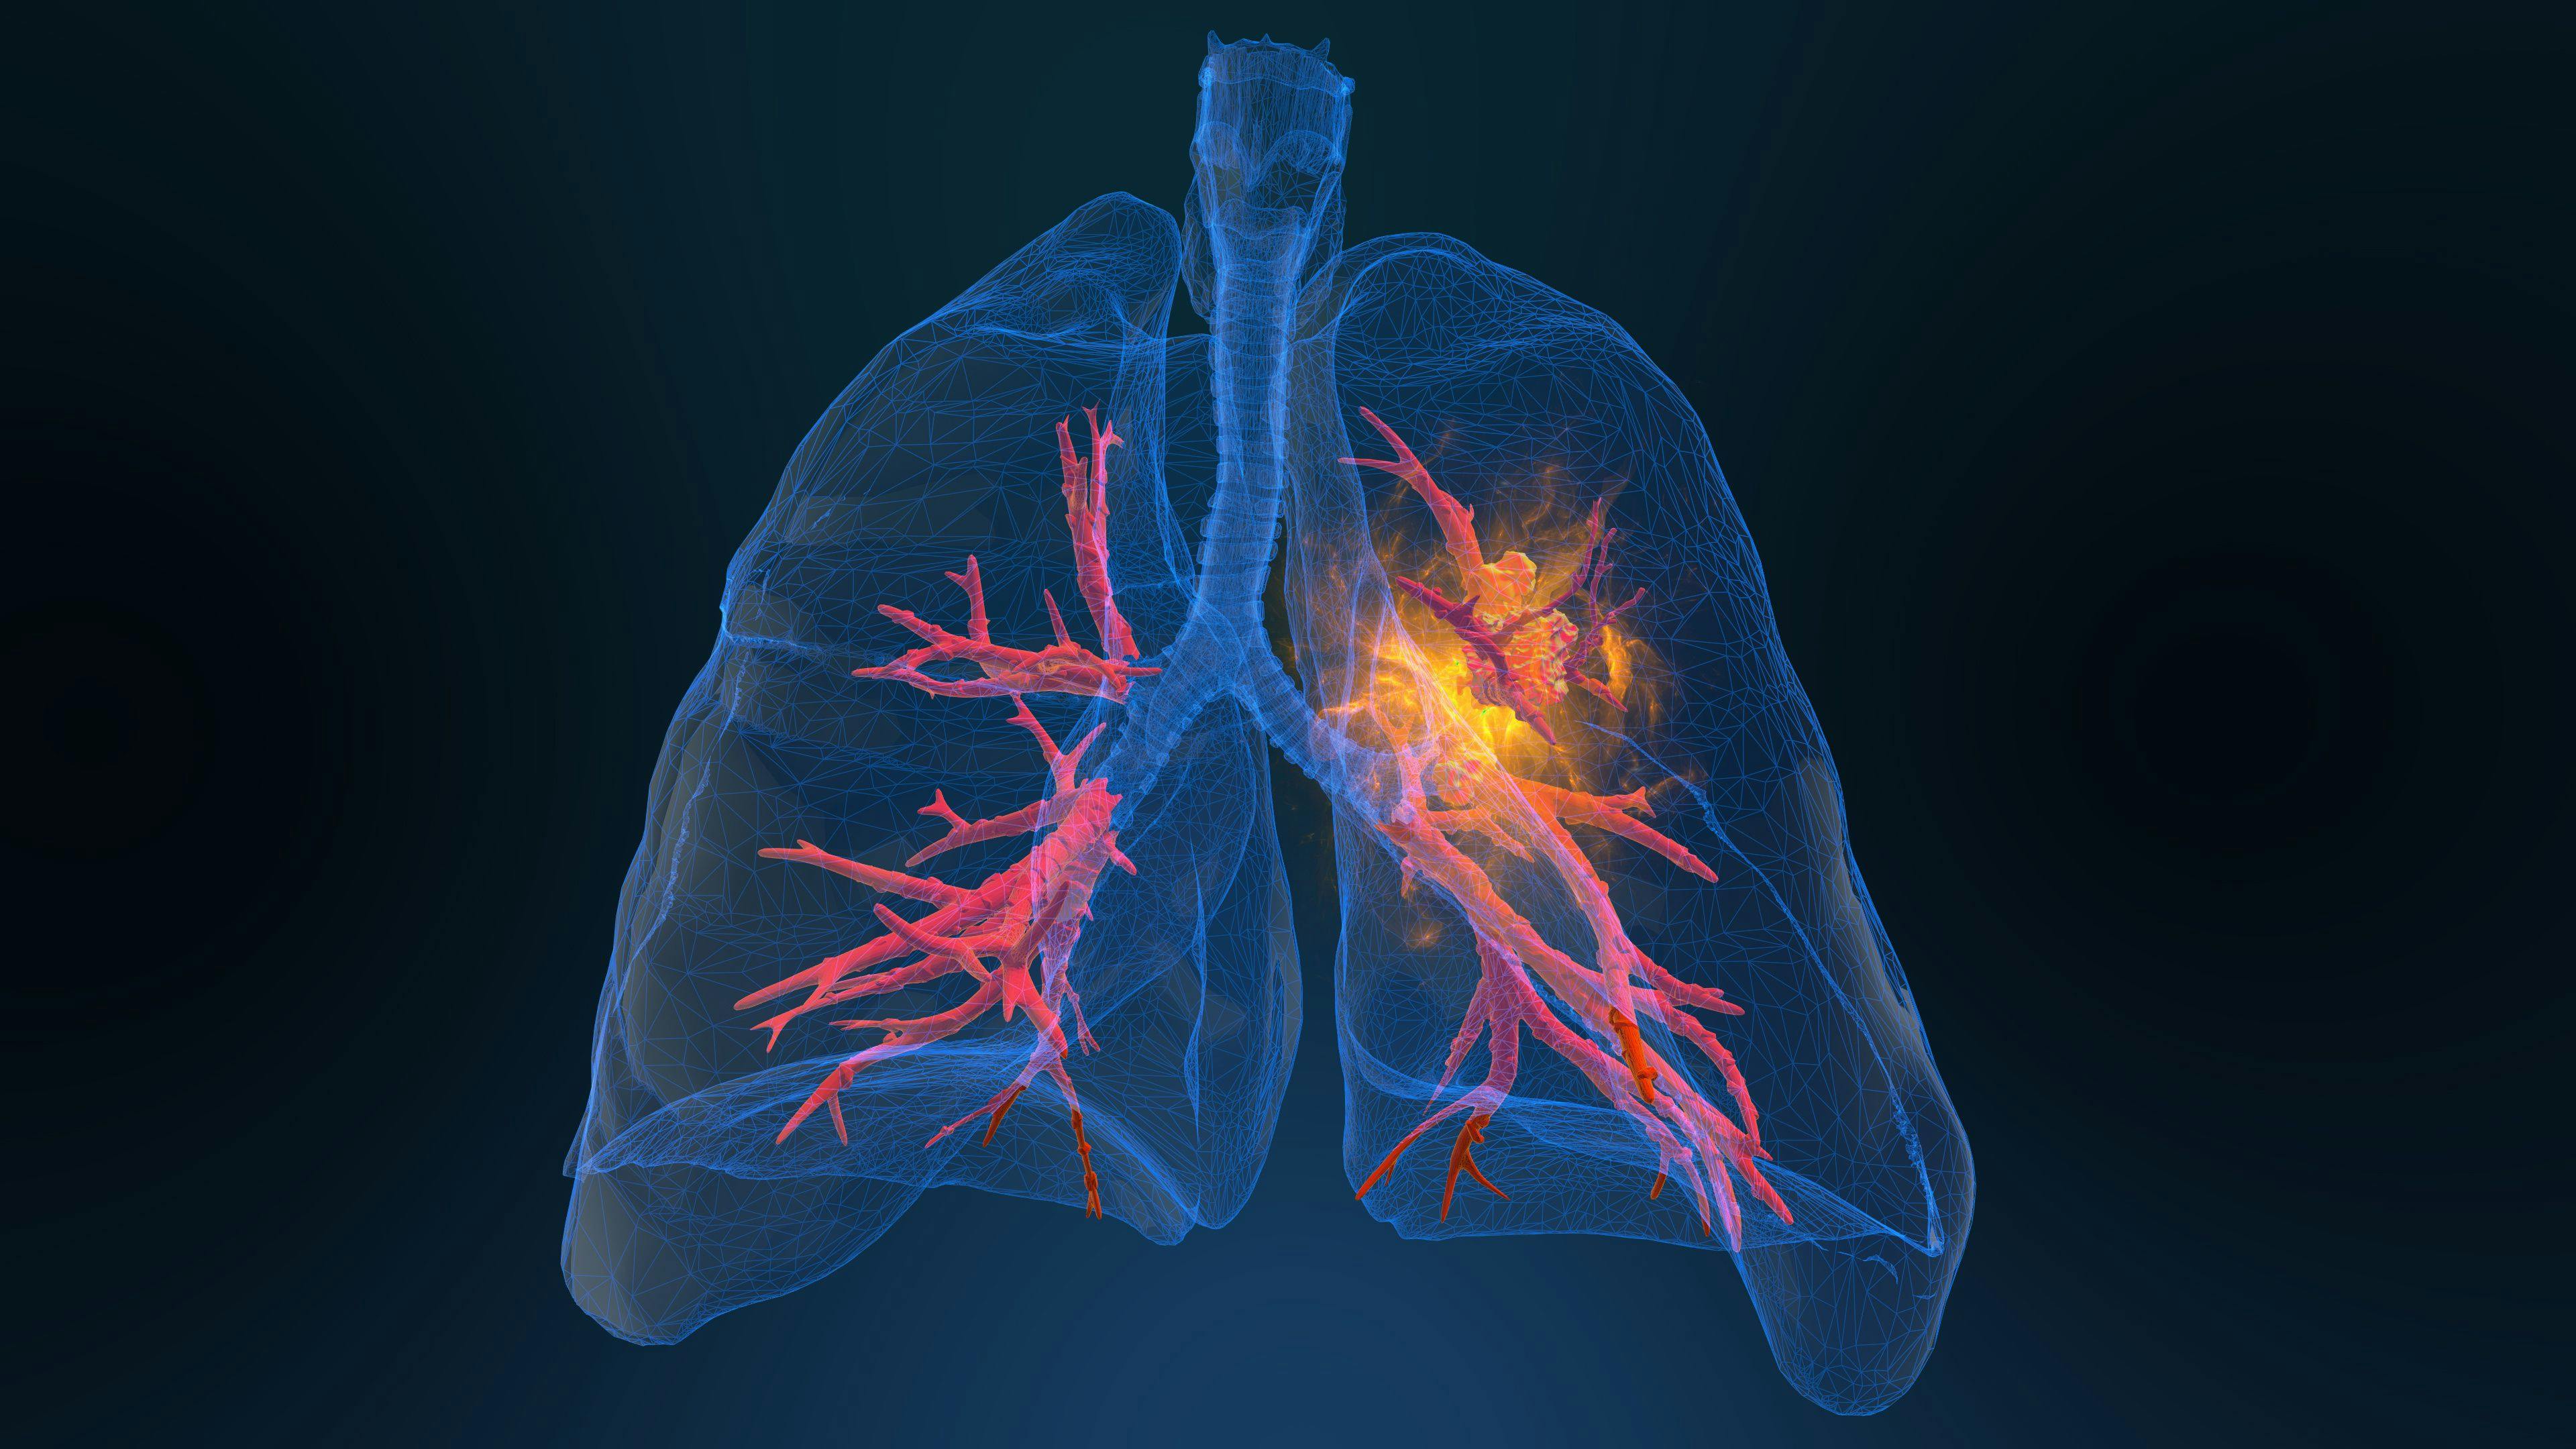 Lung Cancer, Small Cell Lung Cancer | Image Credit: appledesign - stock.adobe.com